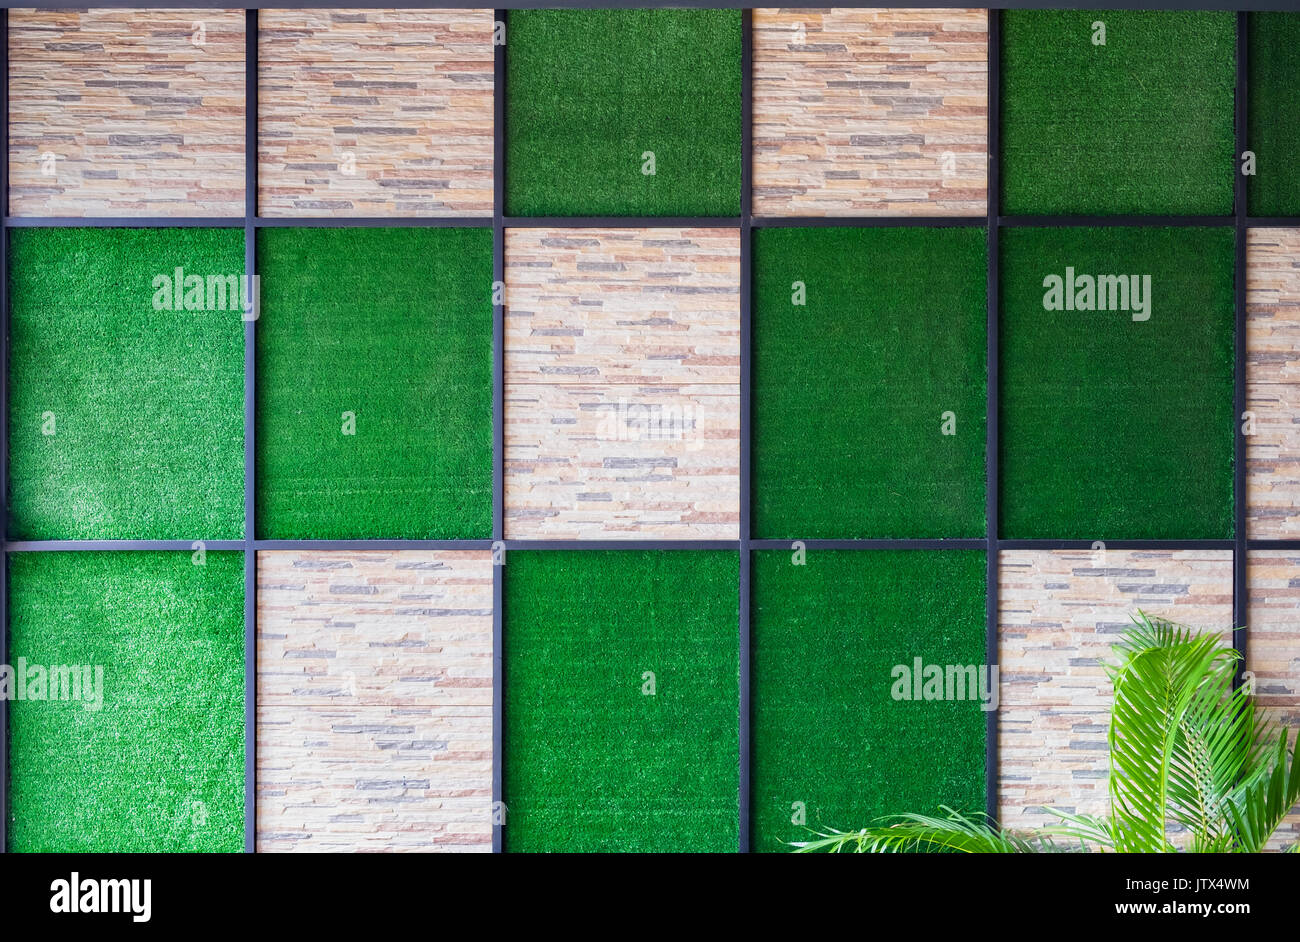 Wall of stone and artificial grass background with metal frame and palm  tree decoration in rest room Stock Photo - Alamy